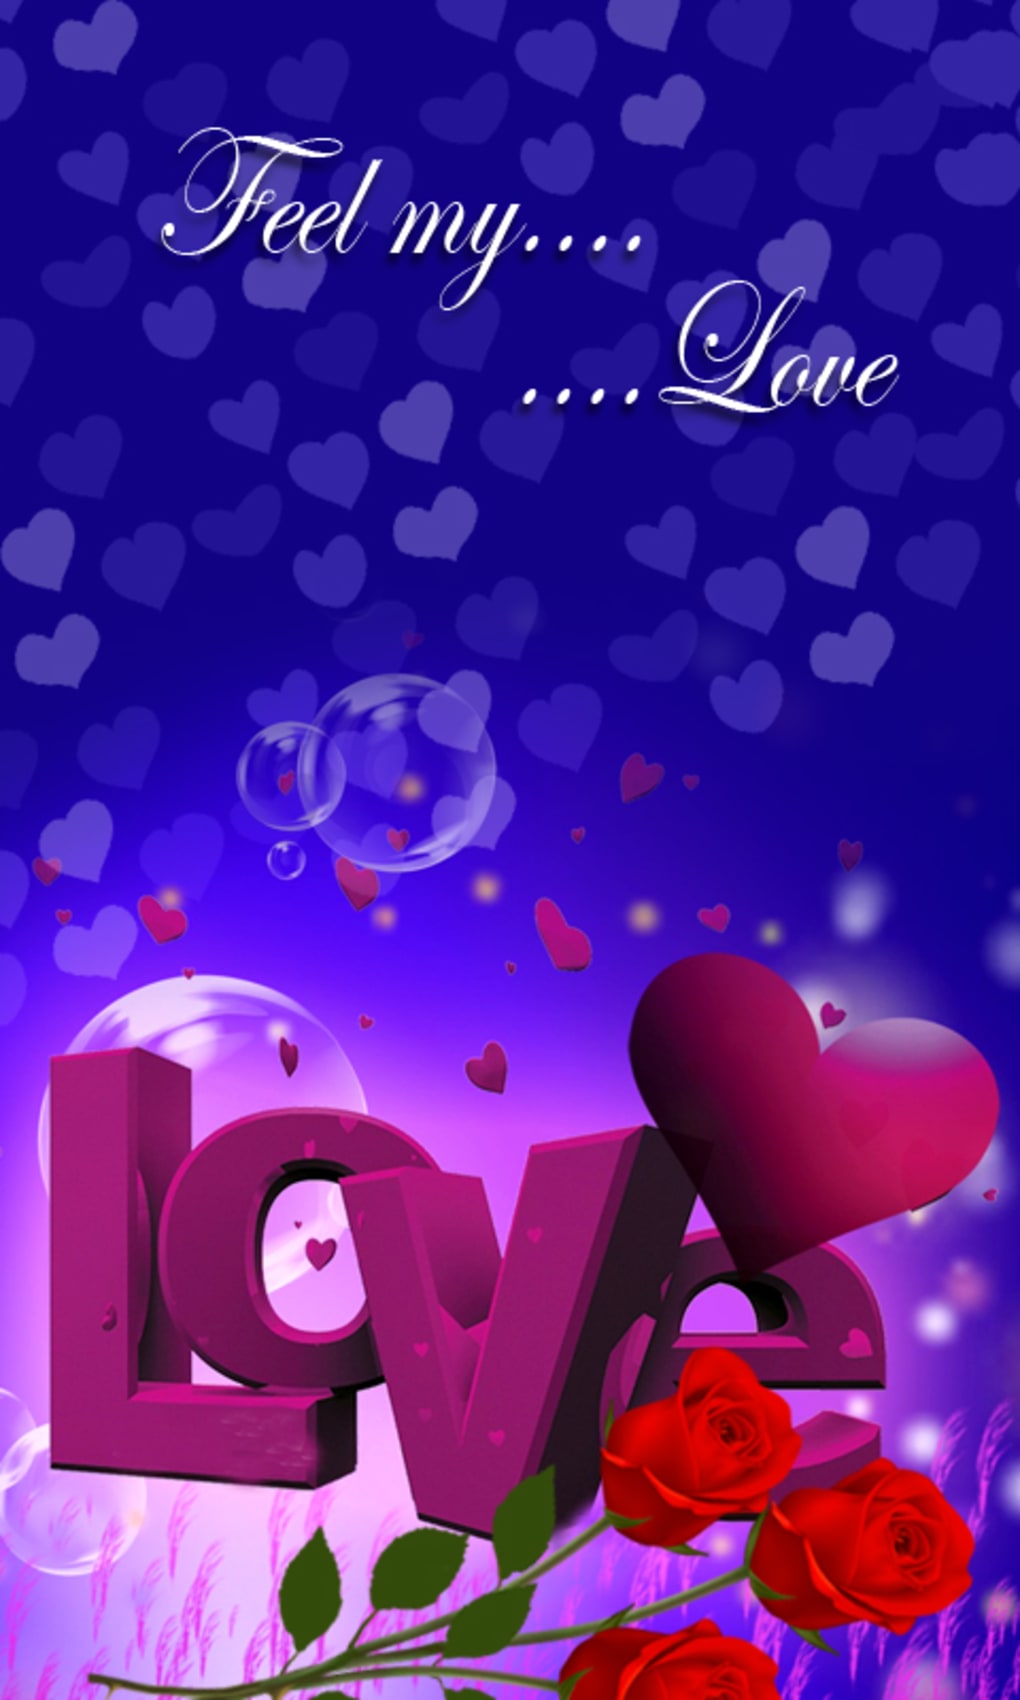 hd love wallpaper download for android,heart,text,love,violet,valentine's day